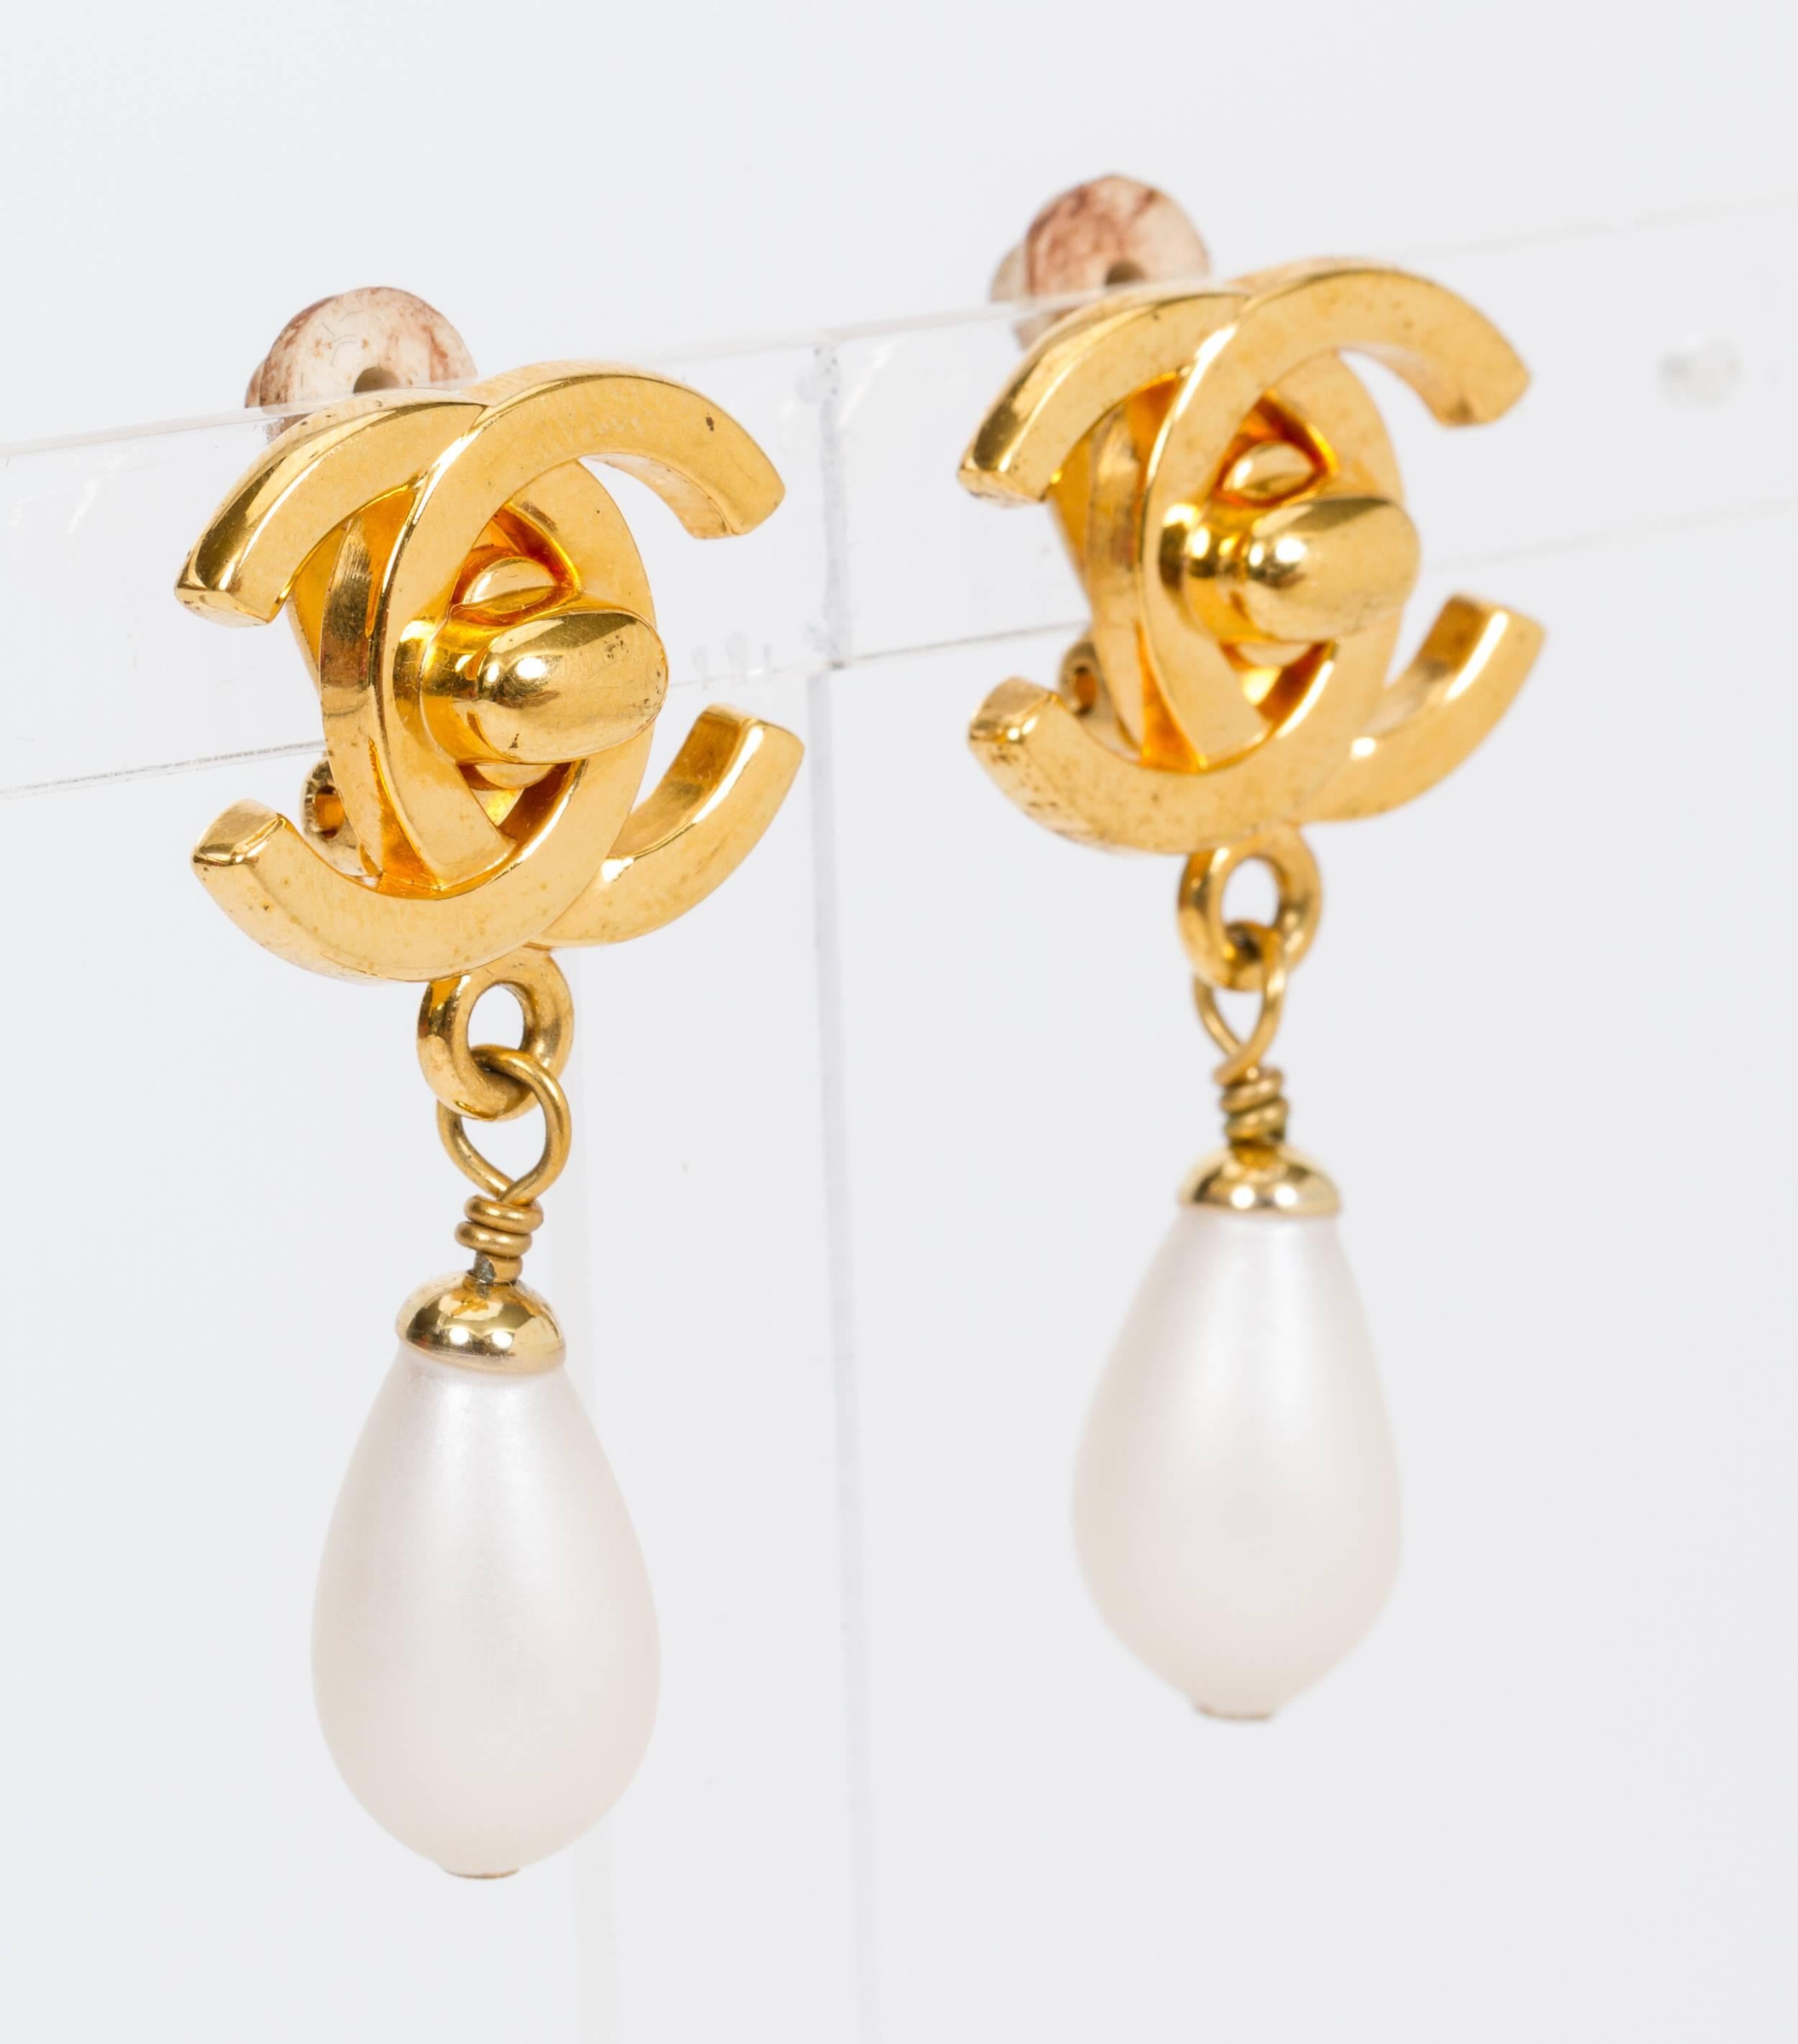 Chanel turn lock and pearl drop earrings. Autumn 96 collection. Comes with velvet pouch.
